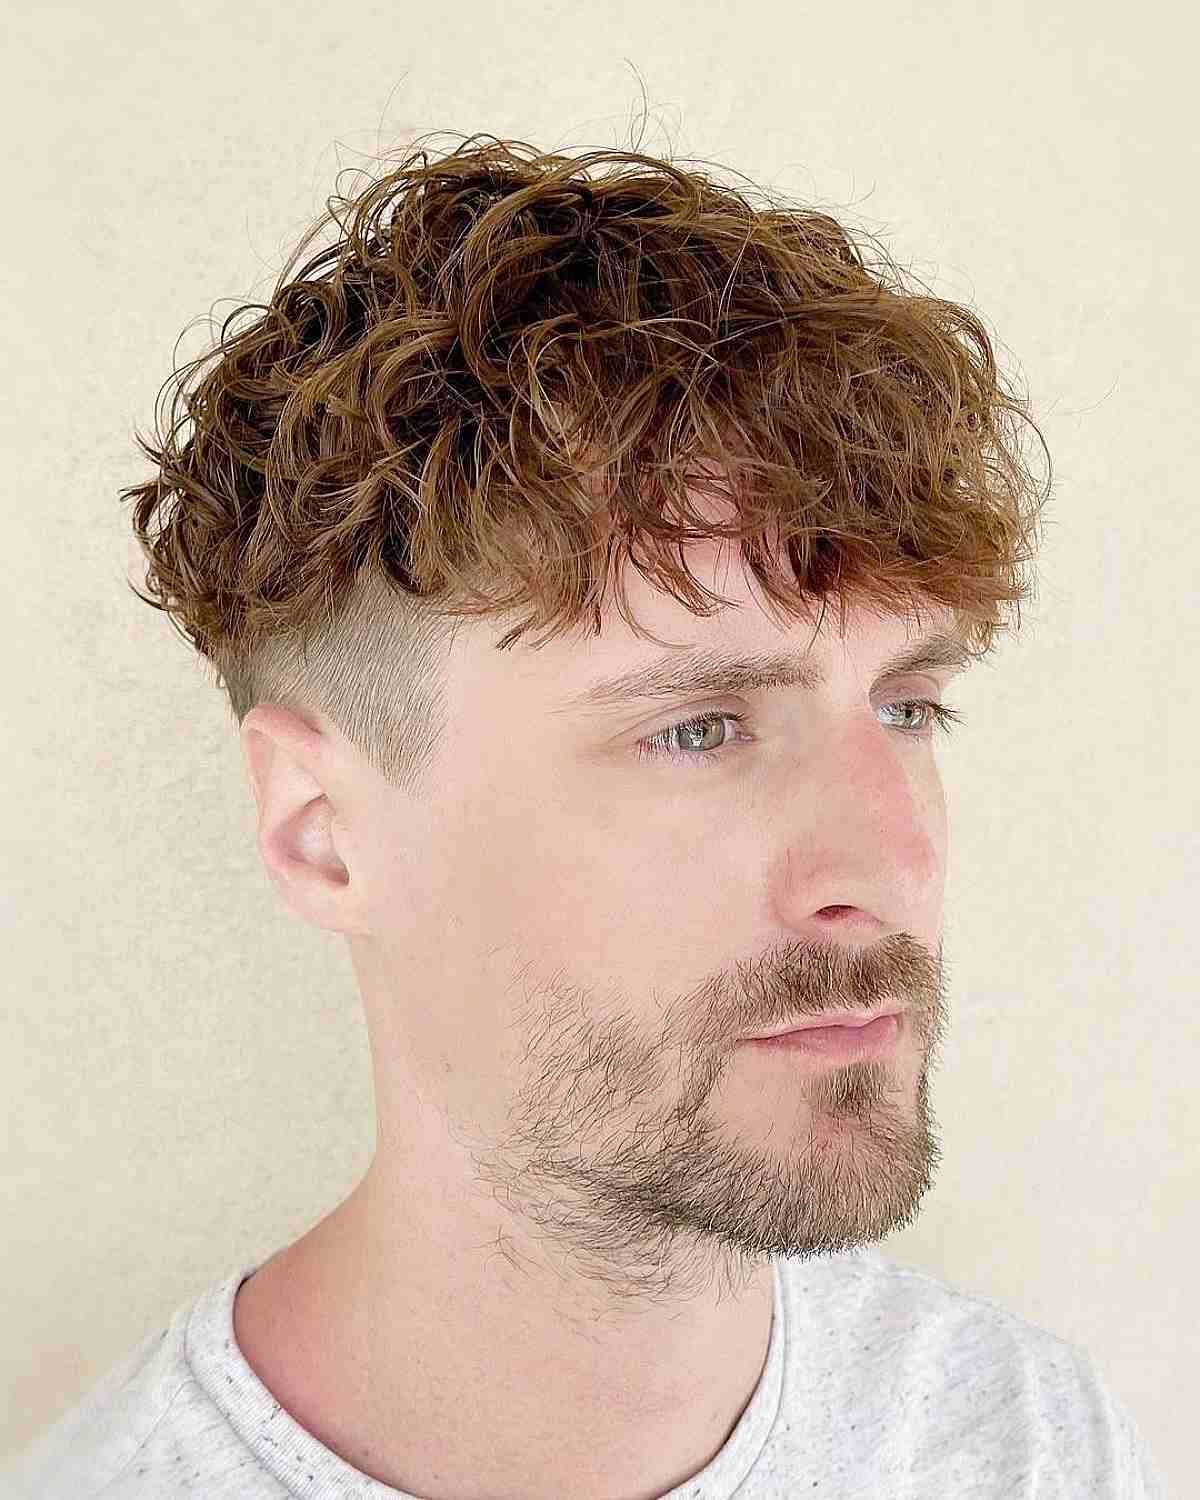 perm hairstyle for men 184 Asian male perm Hairstyles | Best perm hairstyles | perm hairstyles Perm hairstyles for Men